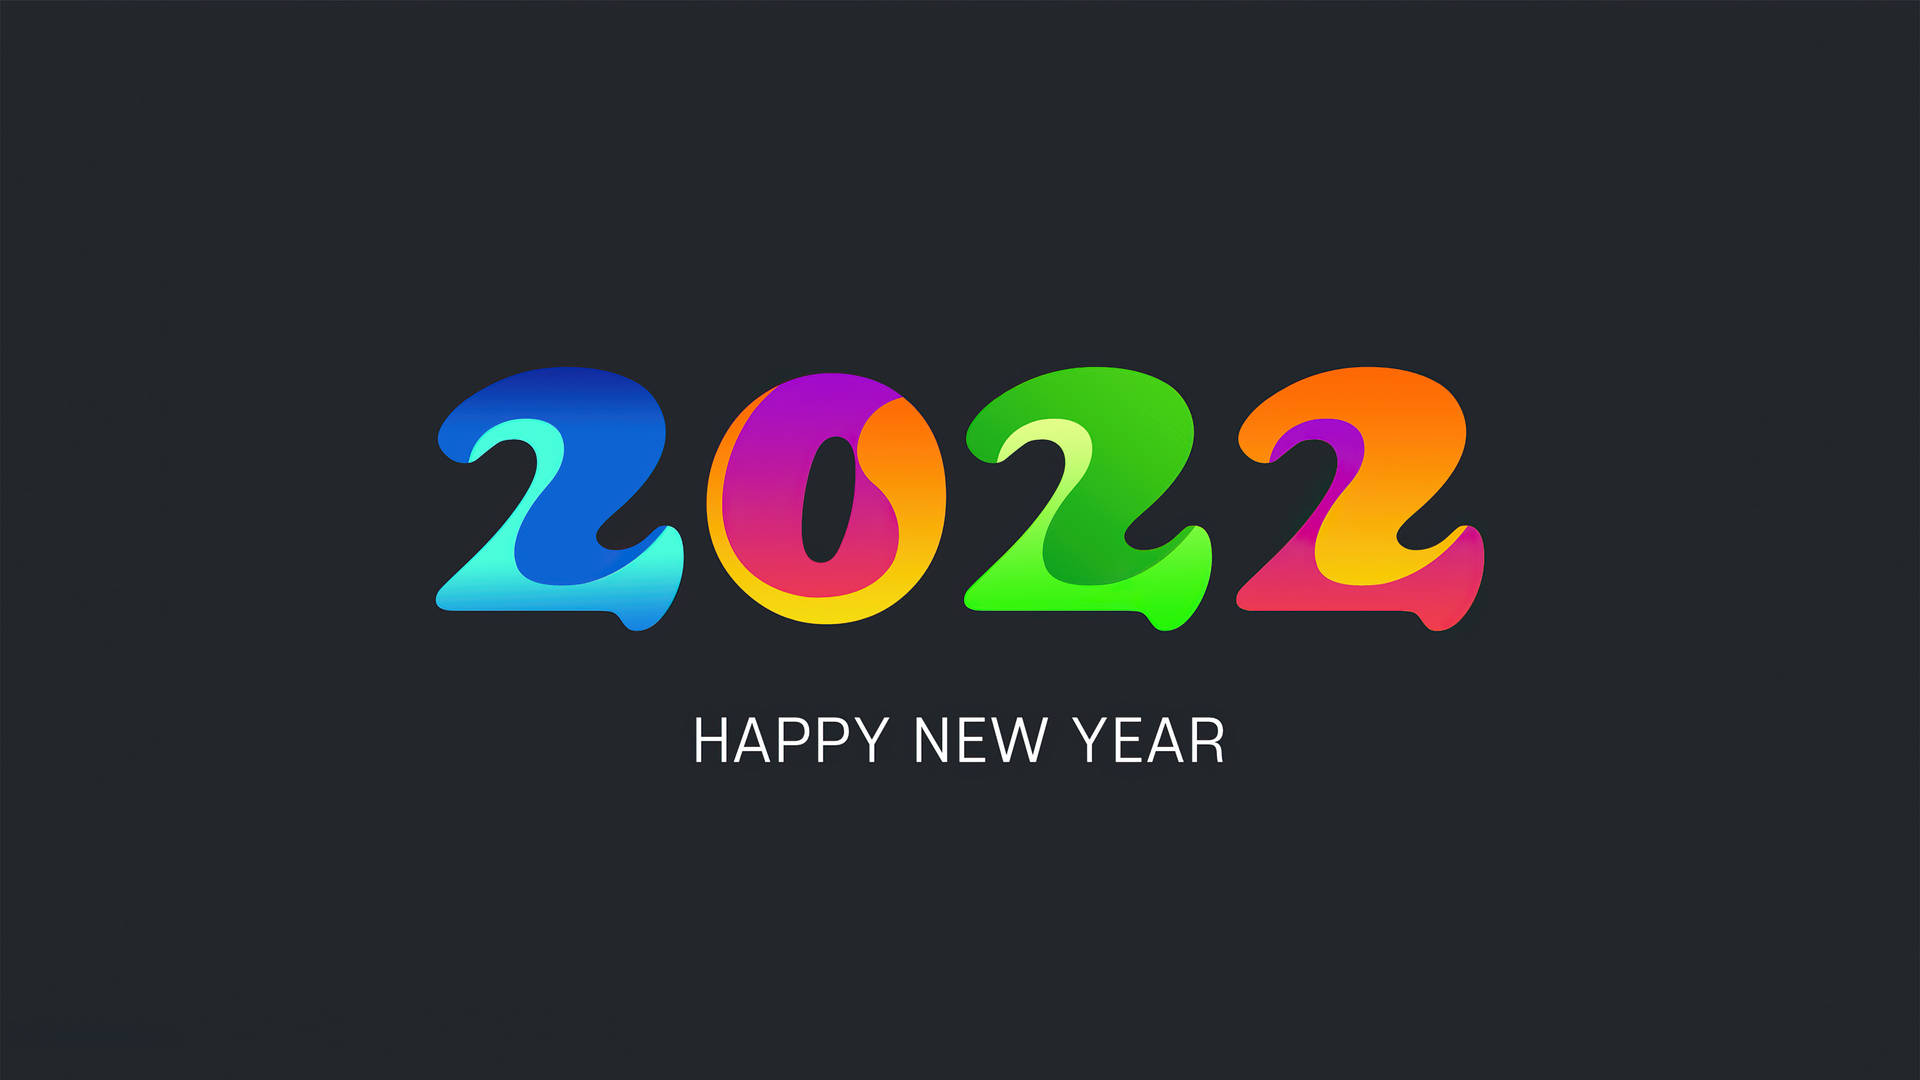 Happy New Year 2022 Colorful Neon Art Wallpaper